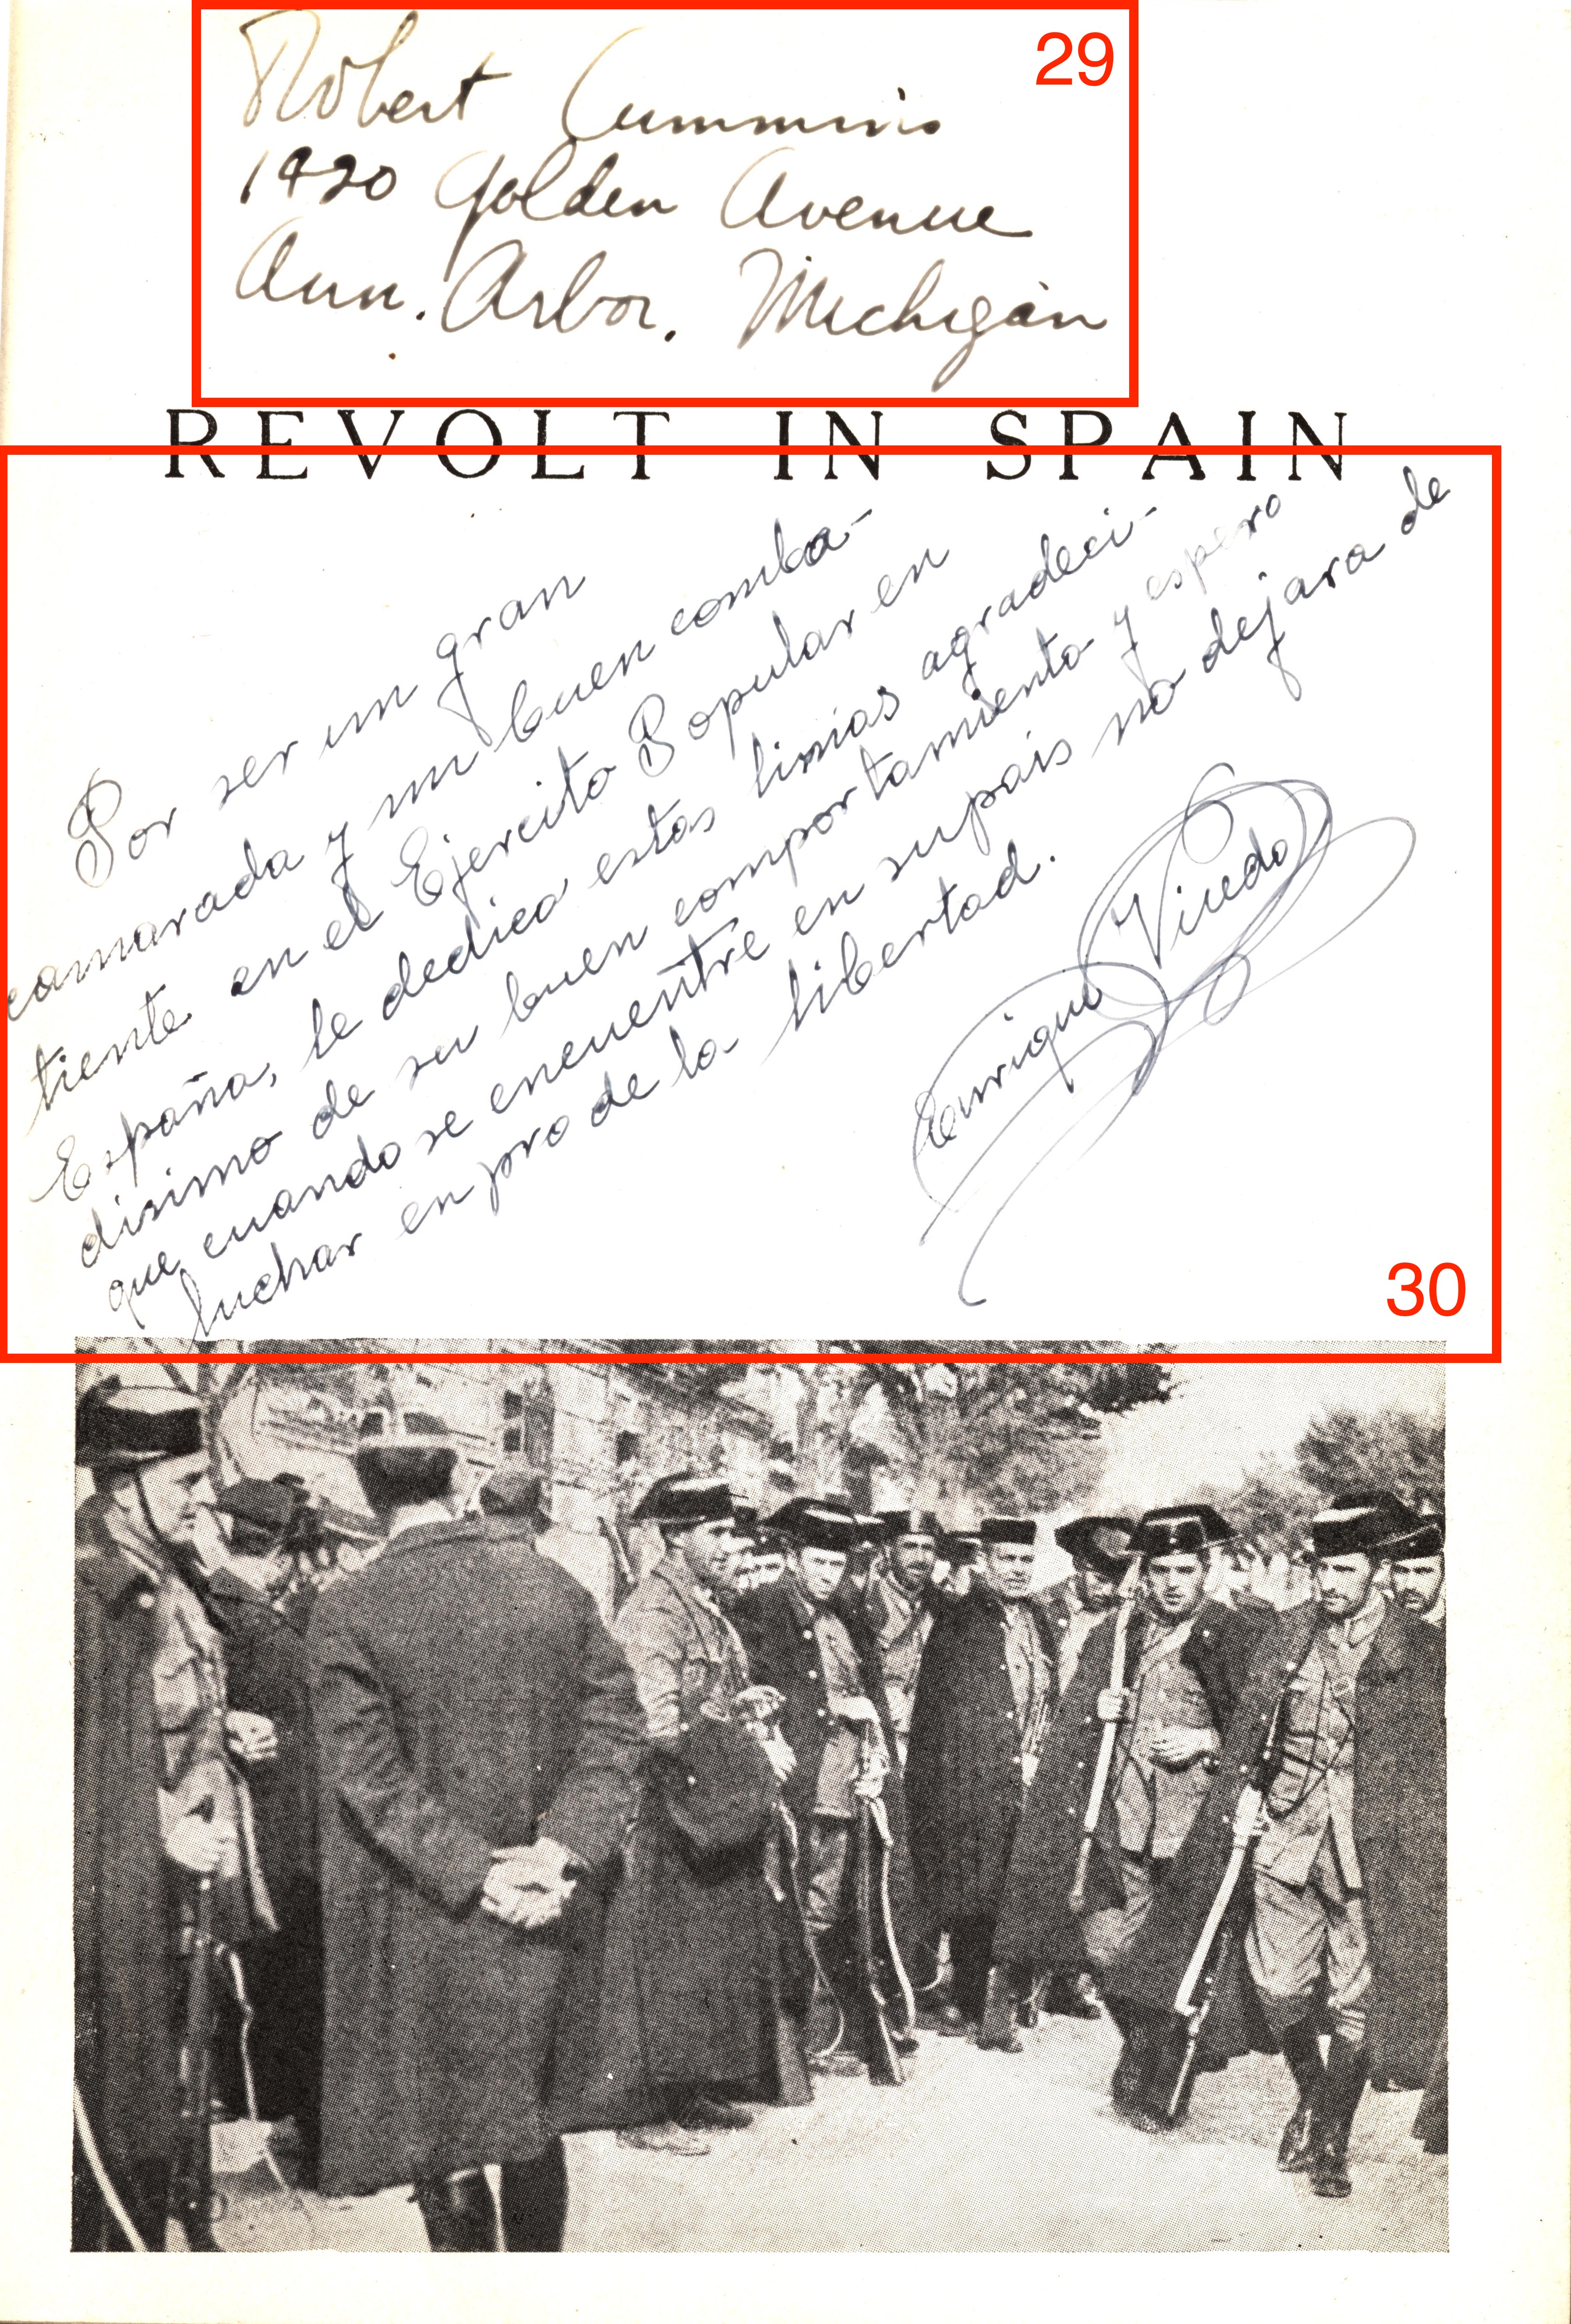 Page 11, titled  "Revolt in Spain", with signatures circled.